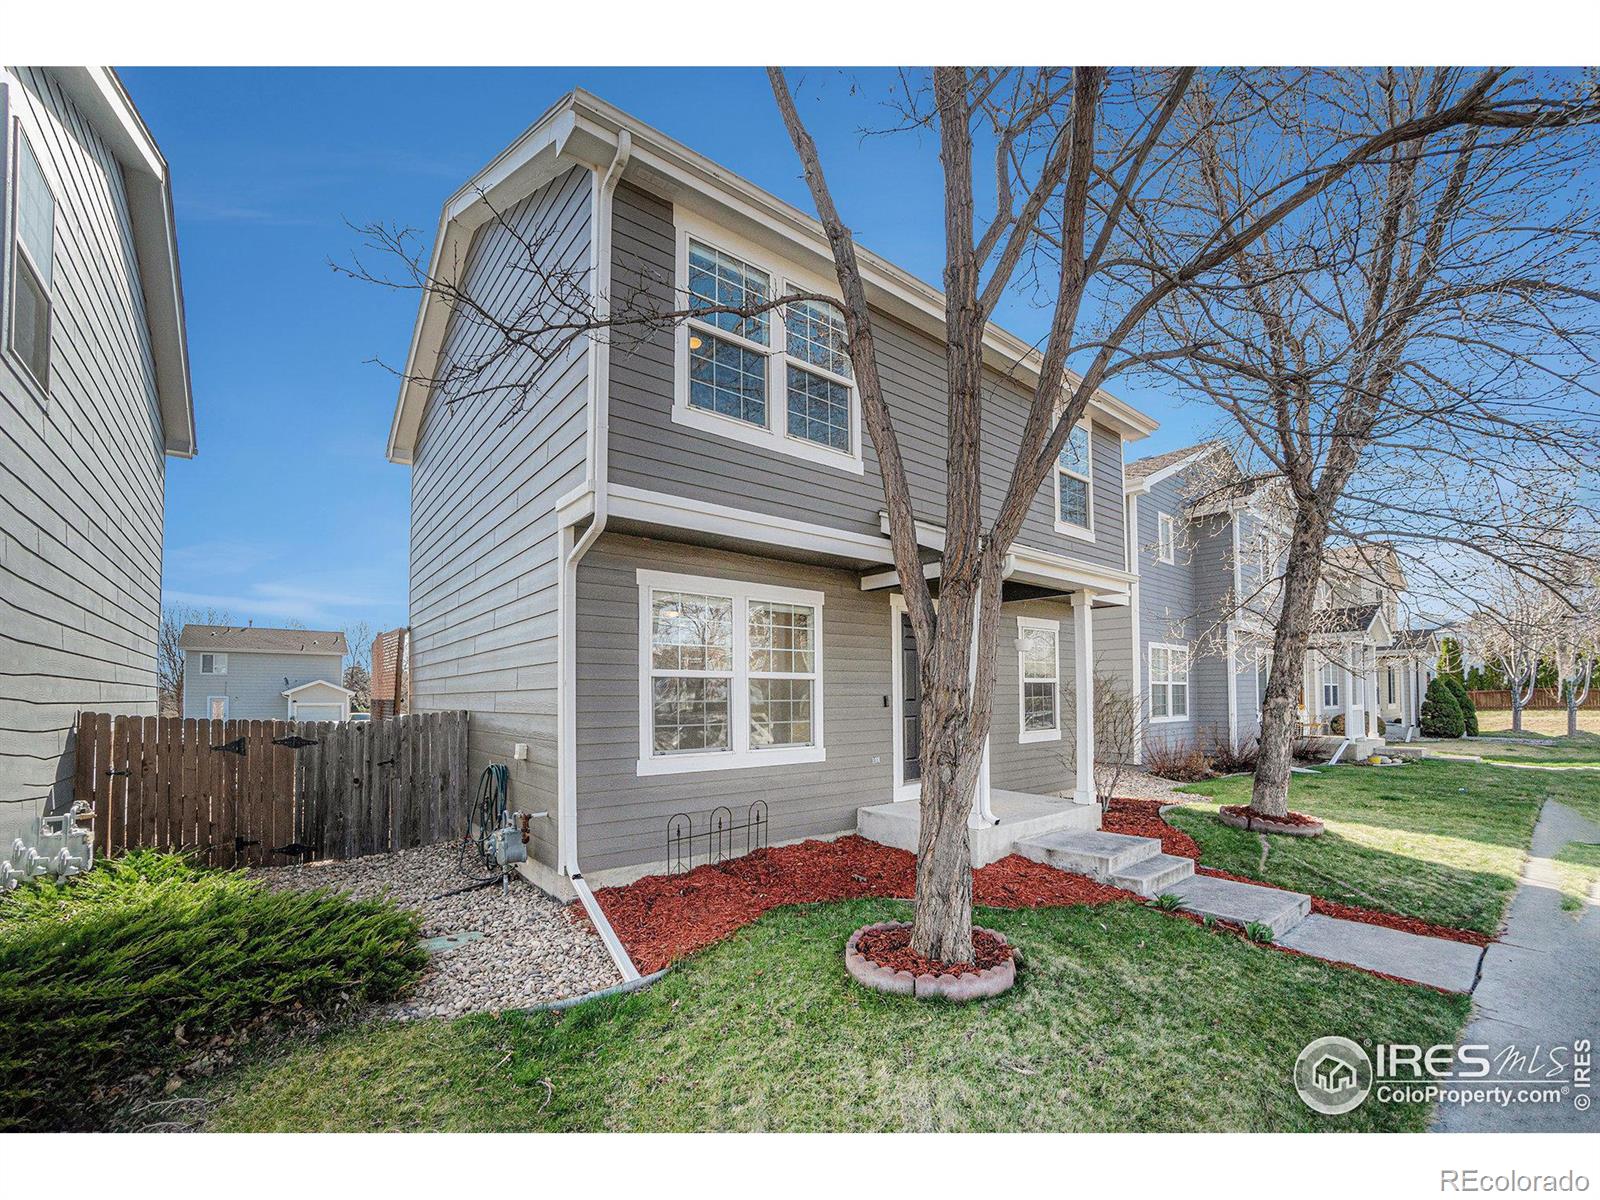 6820  colony hills lane, Fort Collins sold home. Closed on 2024-05-13 for $455,000.